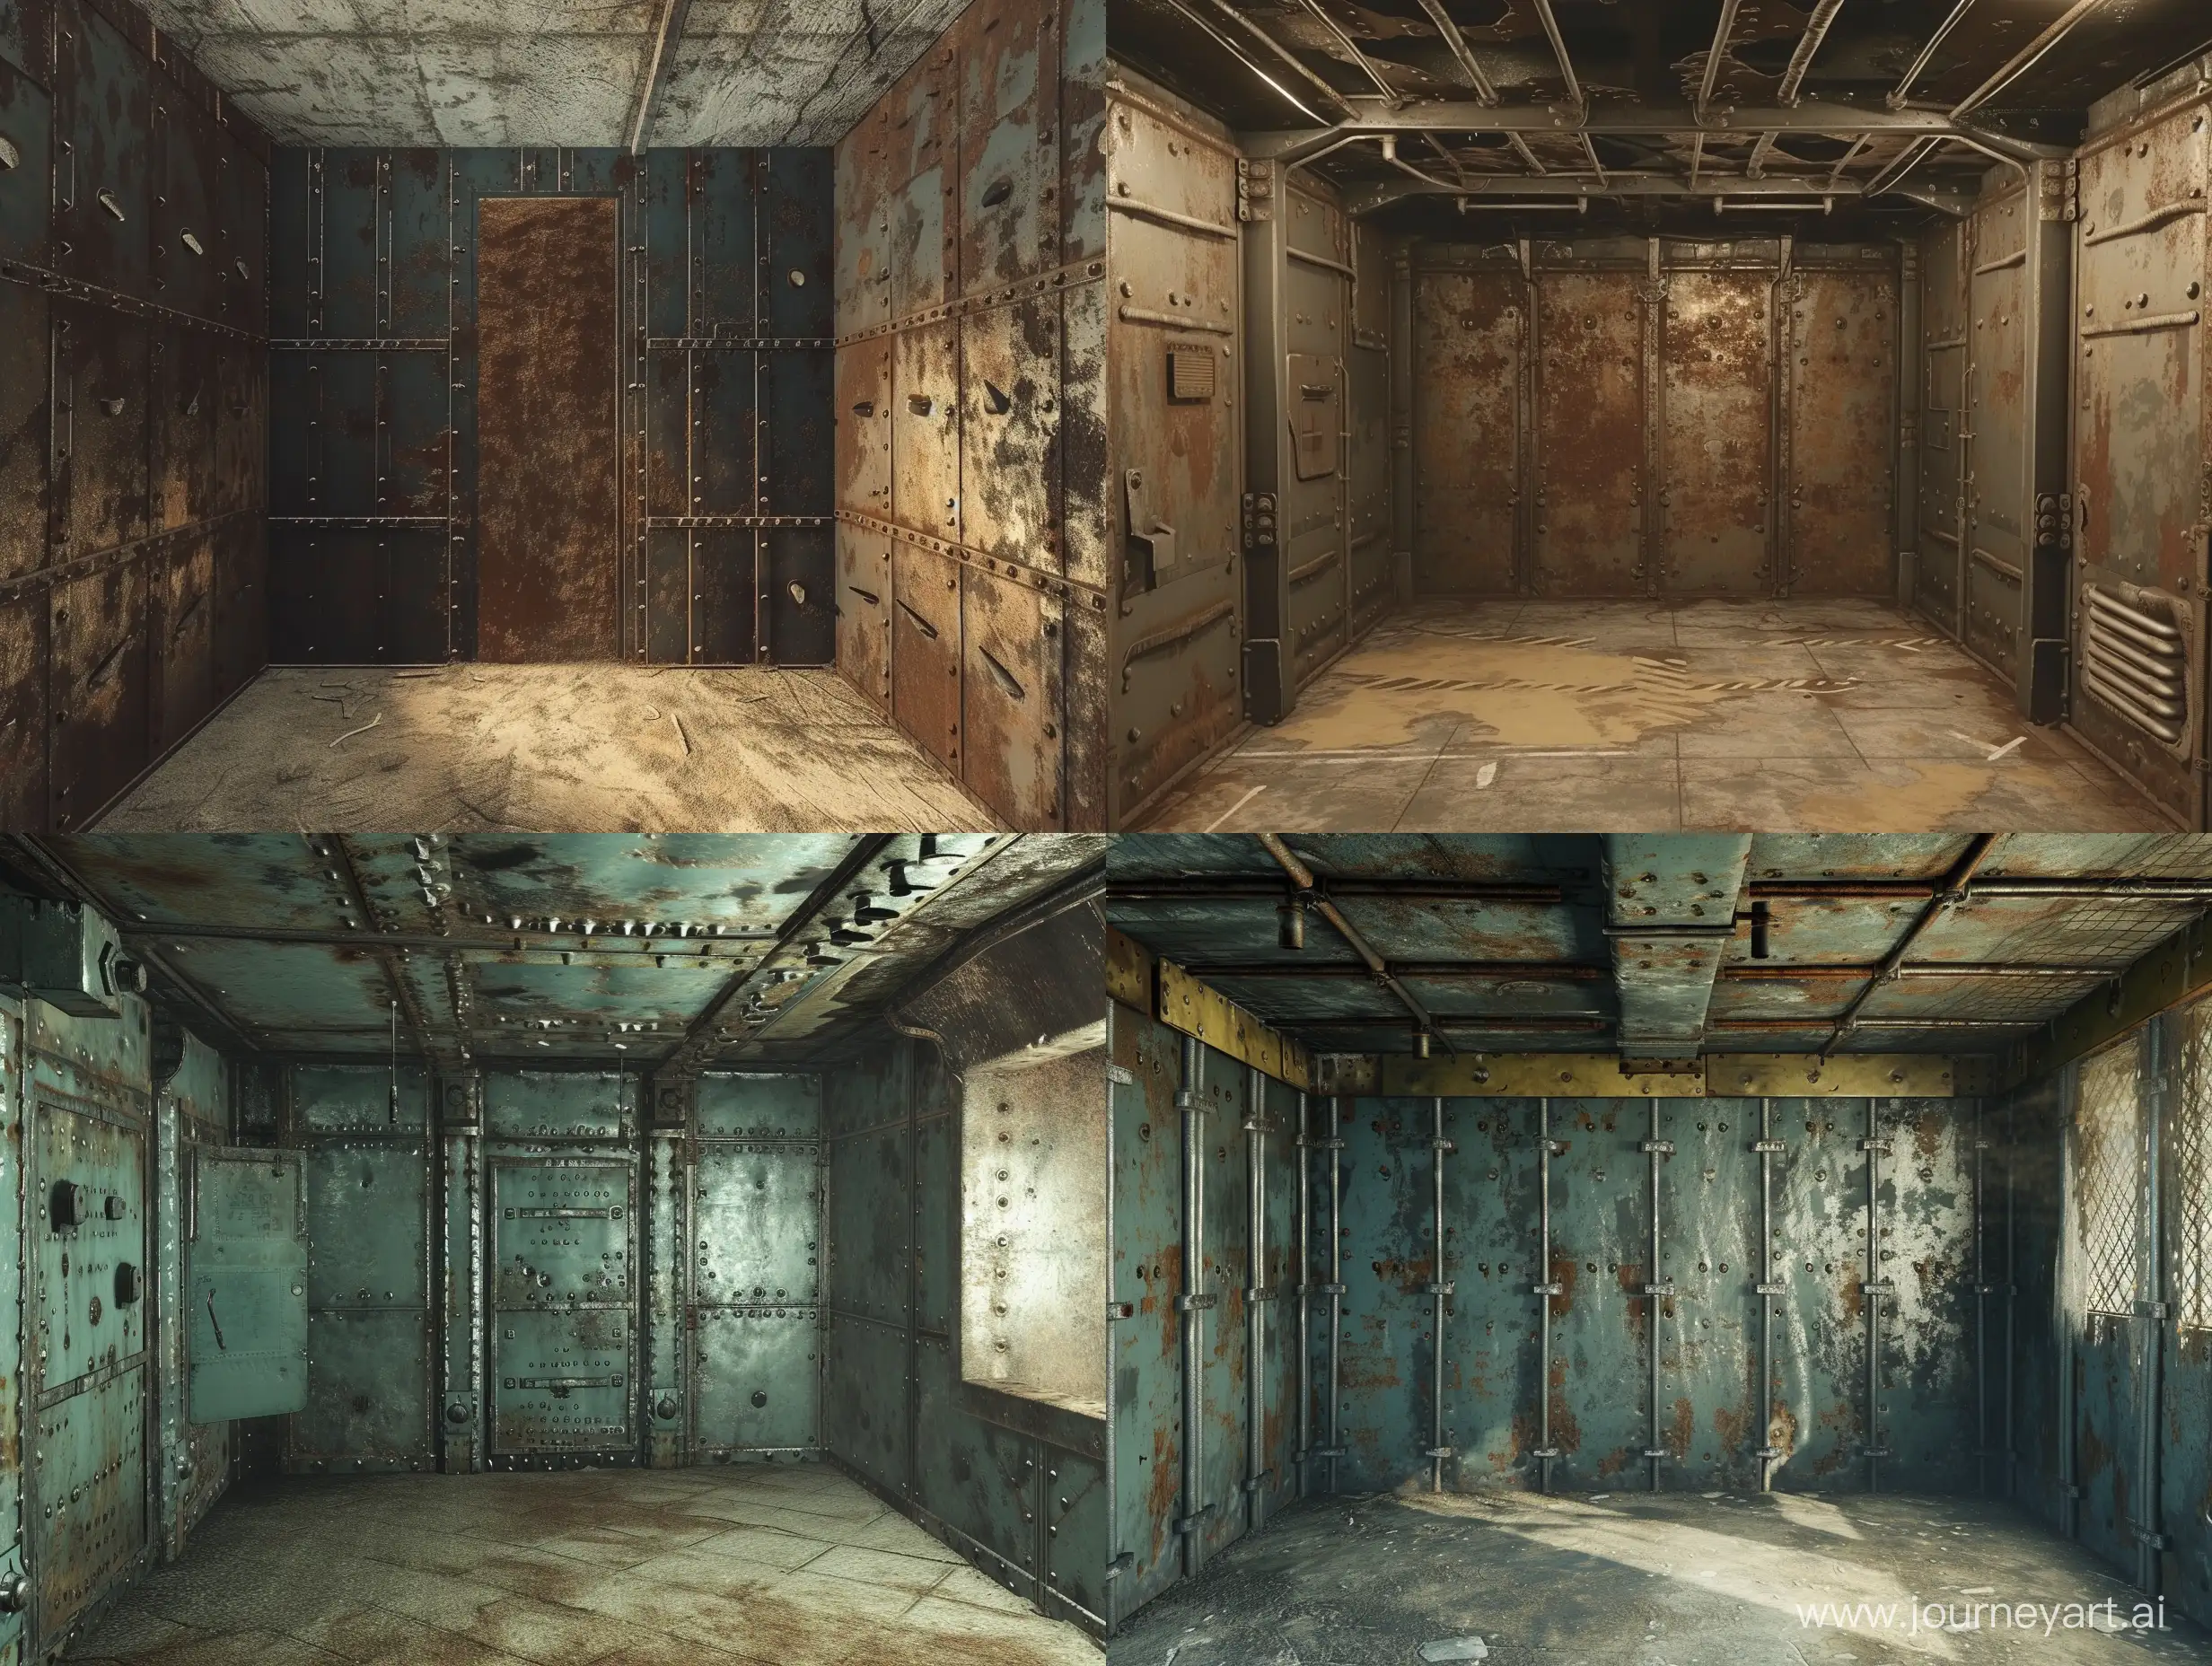 an abandoned room inside an empty bunker from videogaame Fallout, bolted metal walls